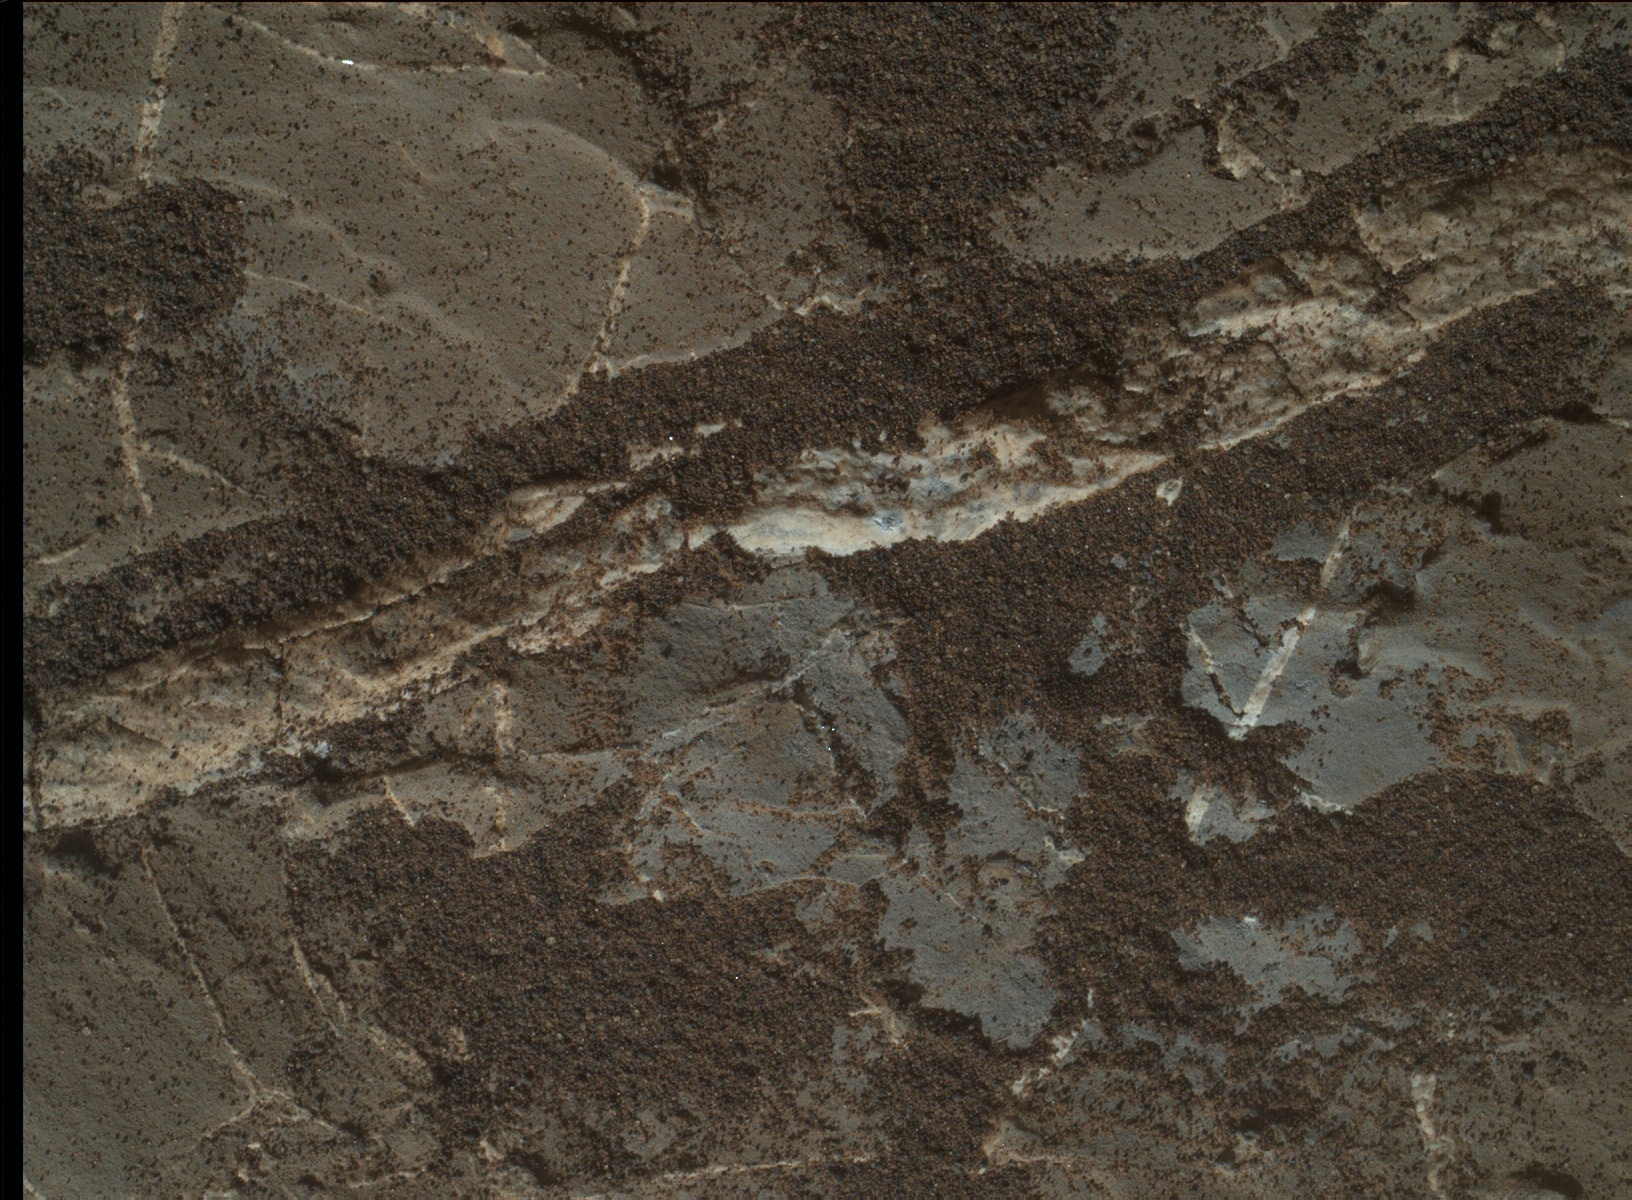 Nasa's Mars rover Curiosity acquired this image using its Mars Hand Lens Imager (MAHLI) on Sol 1975